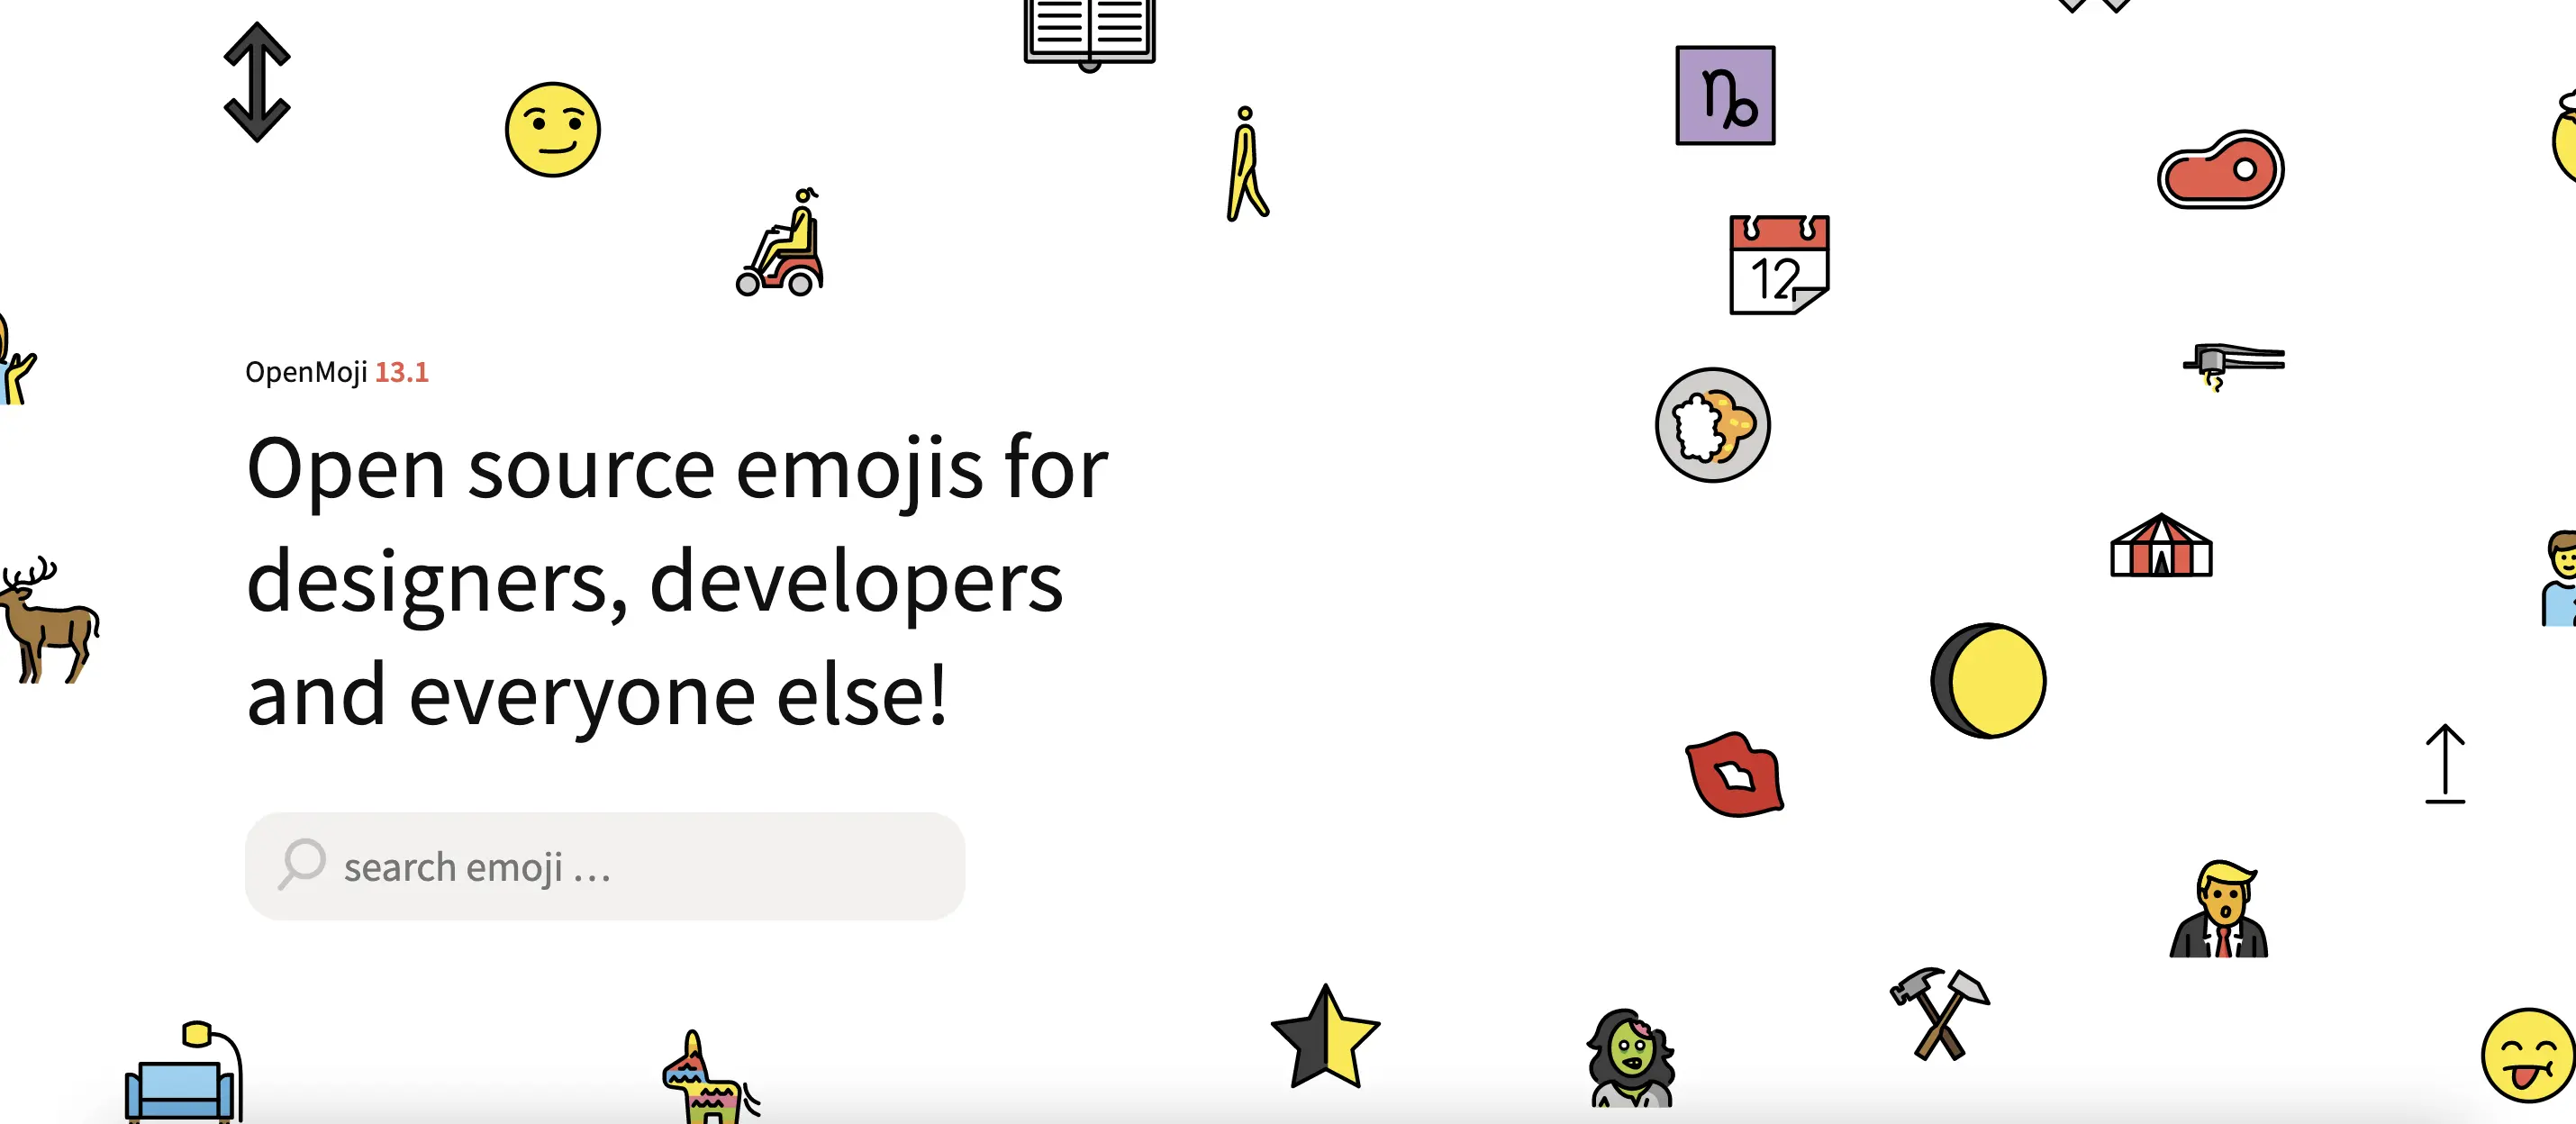 Open source emojis library